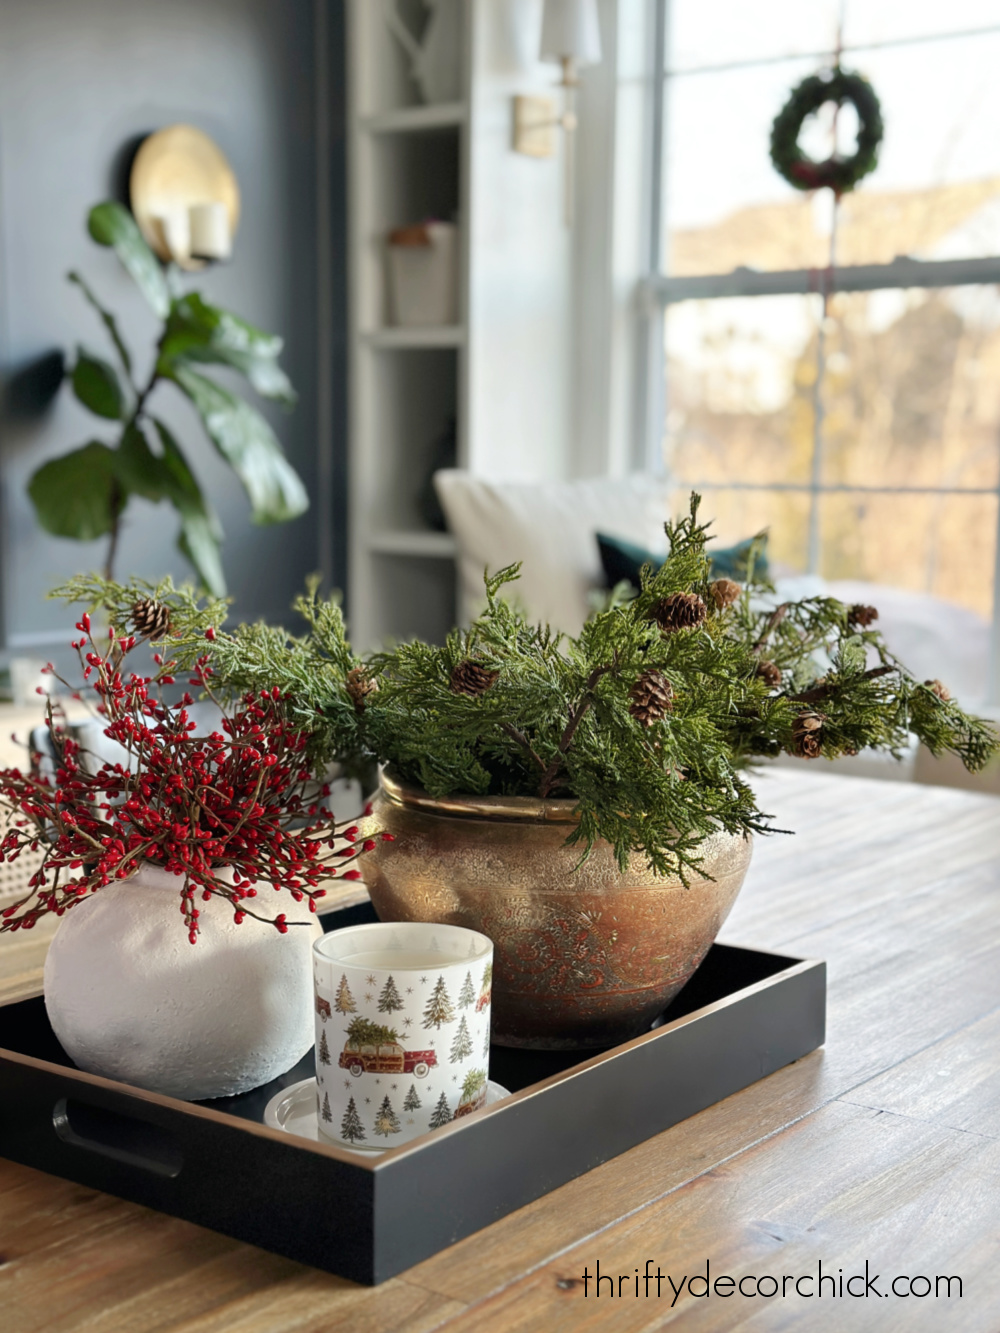 tray on table with Christmas greenery